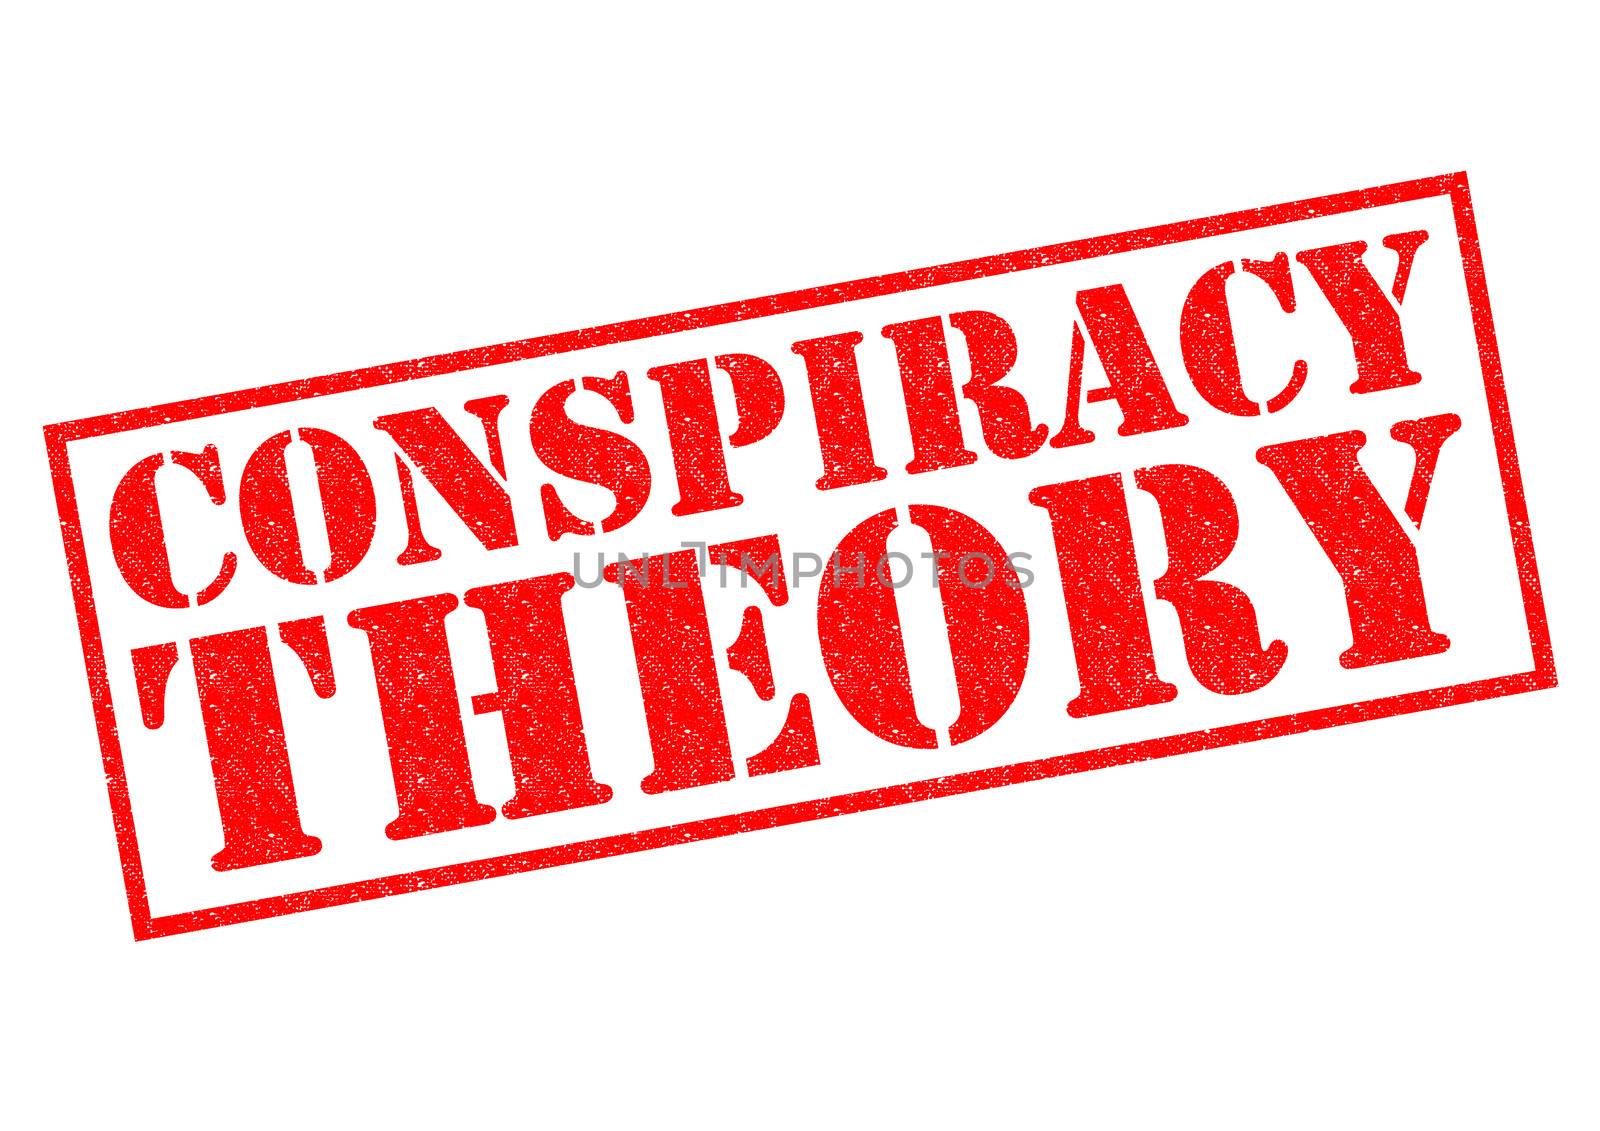 CONSPIRACY THEORY red Rubber Stamp over a white background.